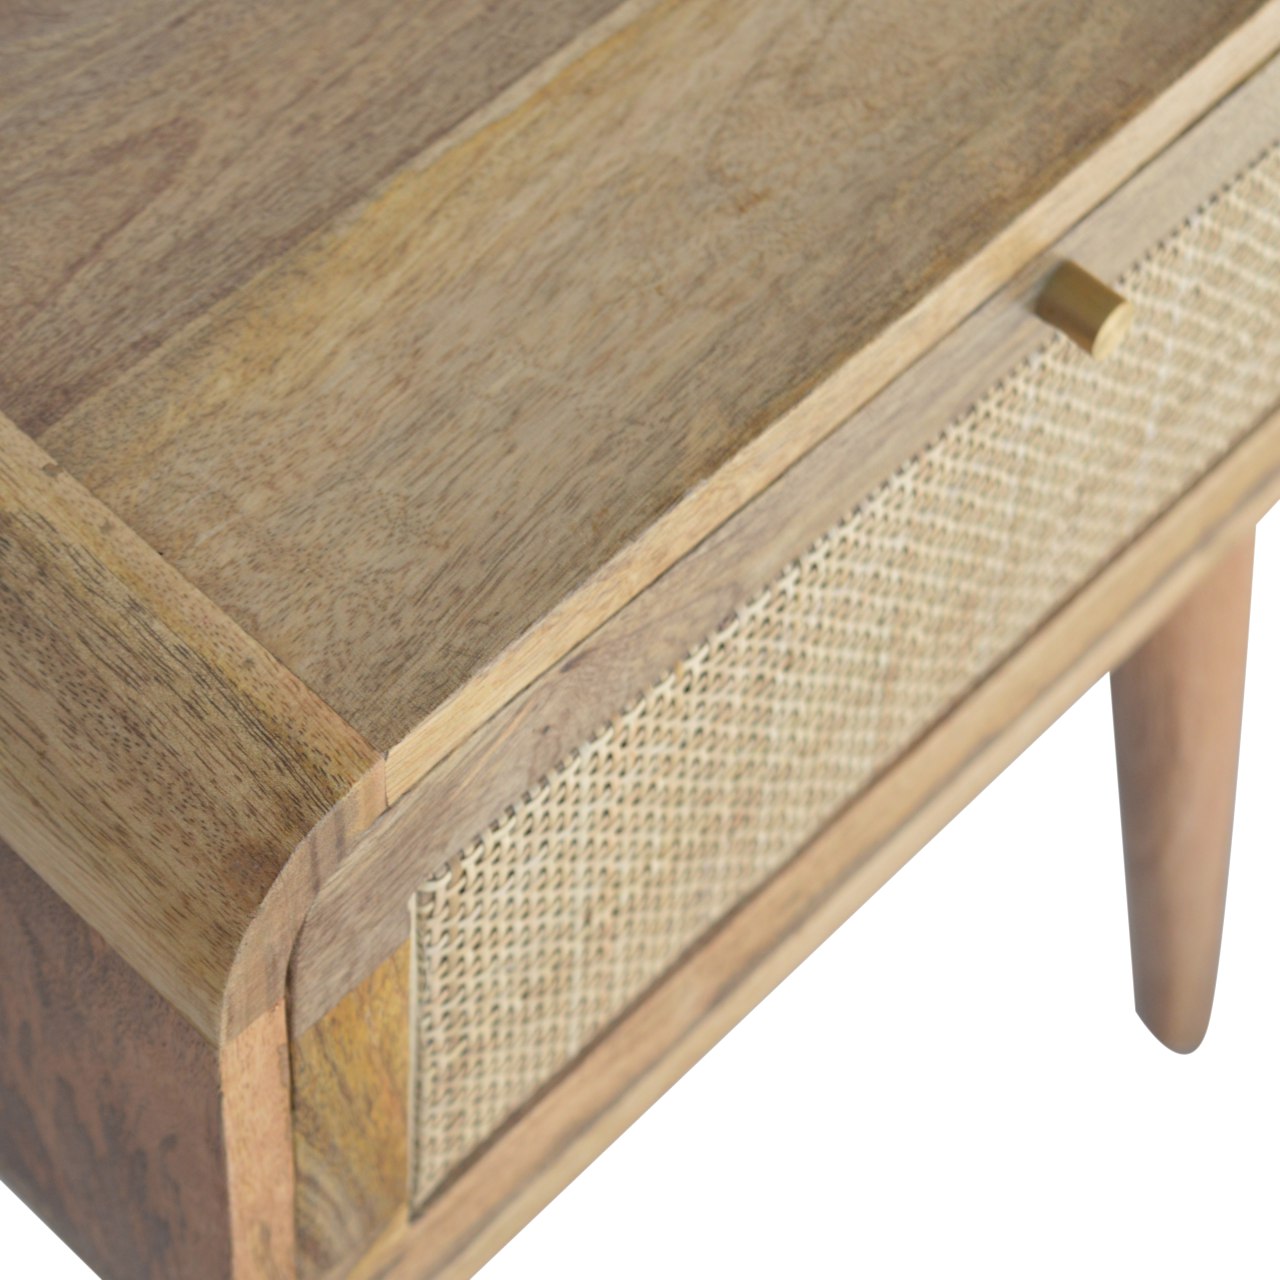 Woven Rattan Effect Storage Table - mancavesuperstore